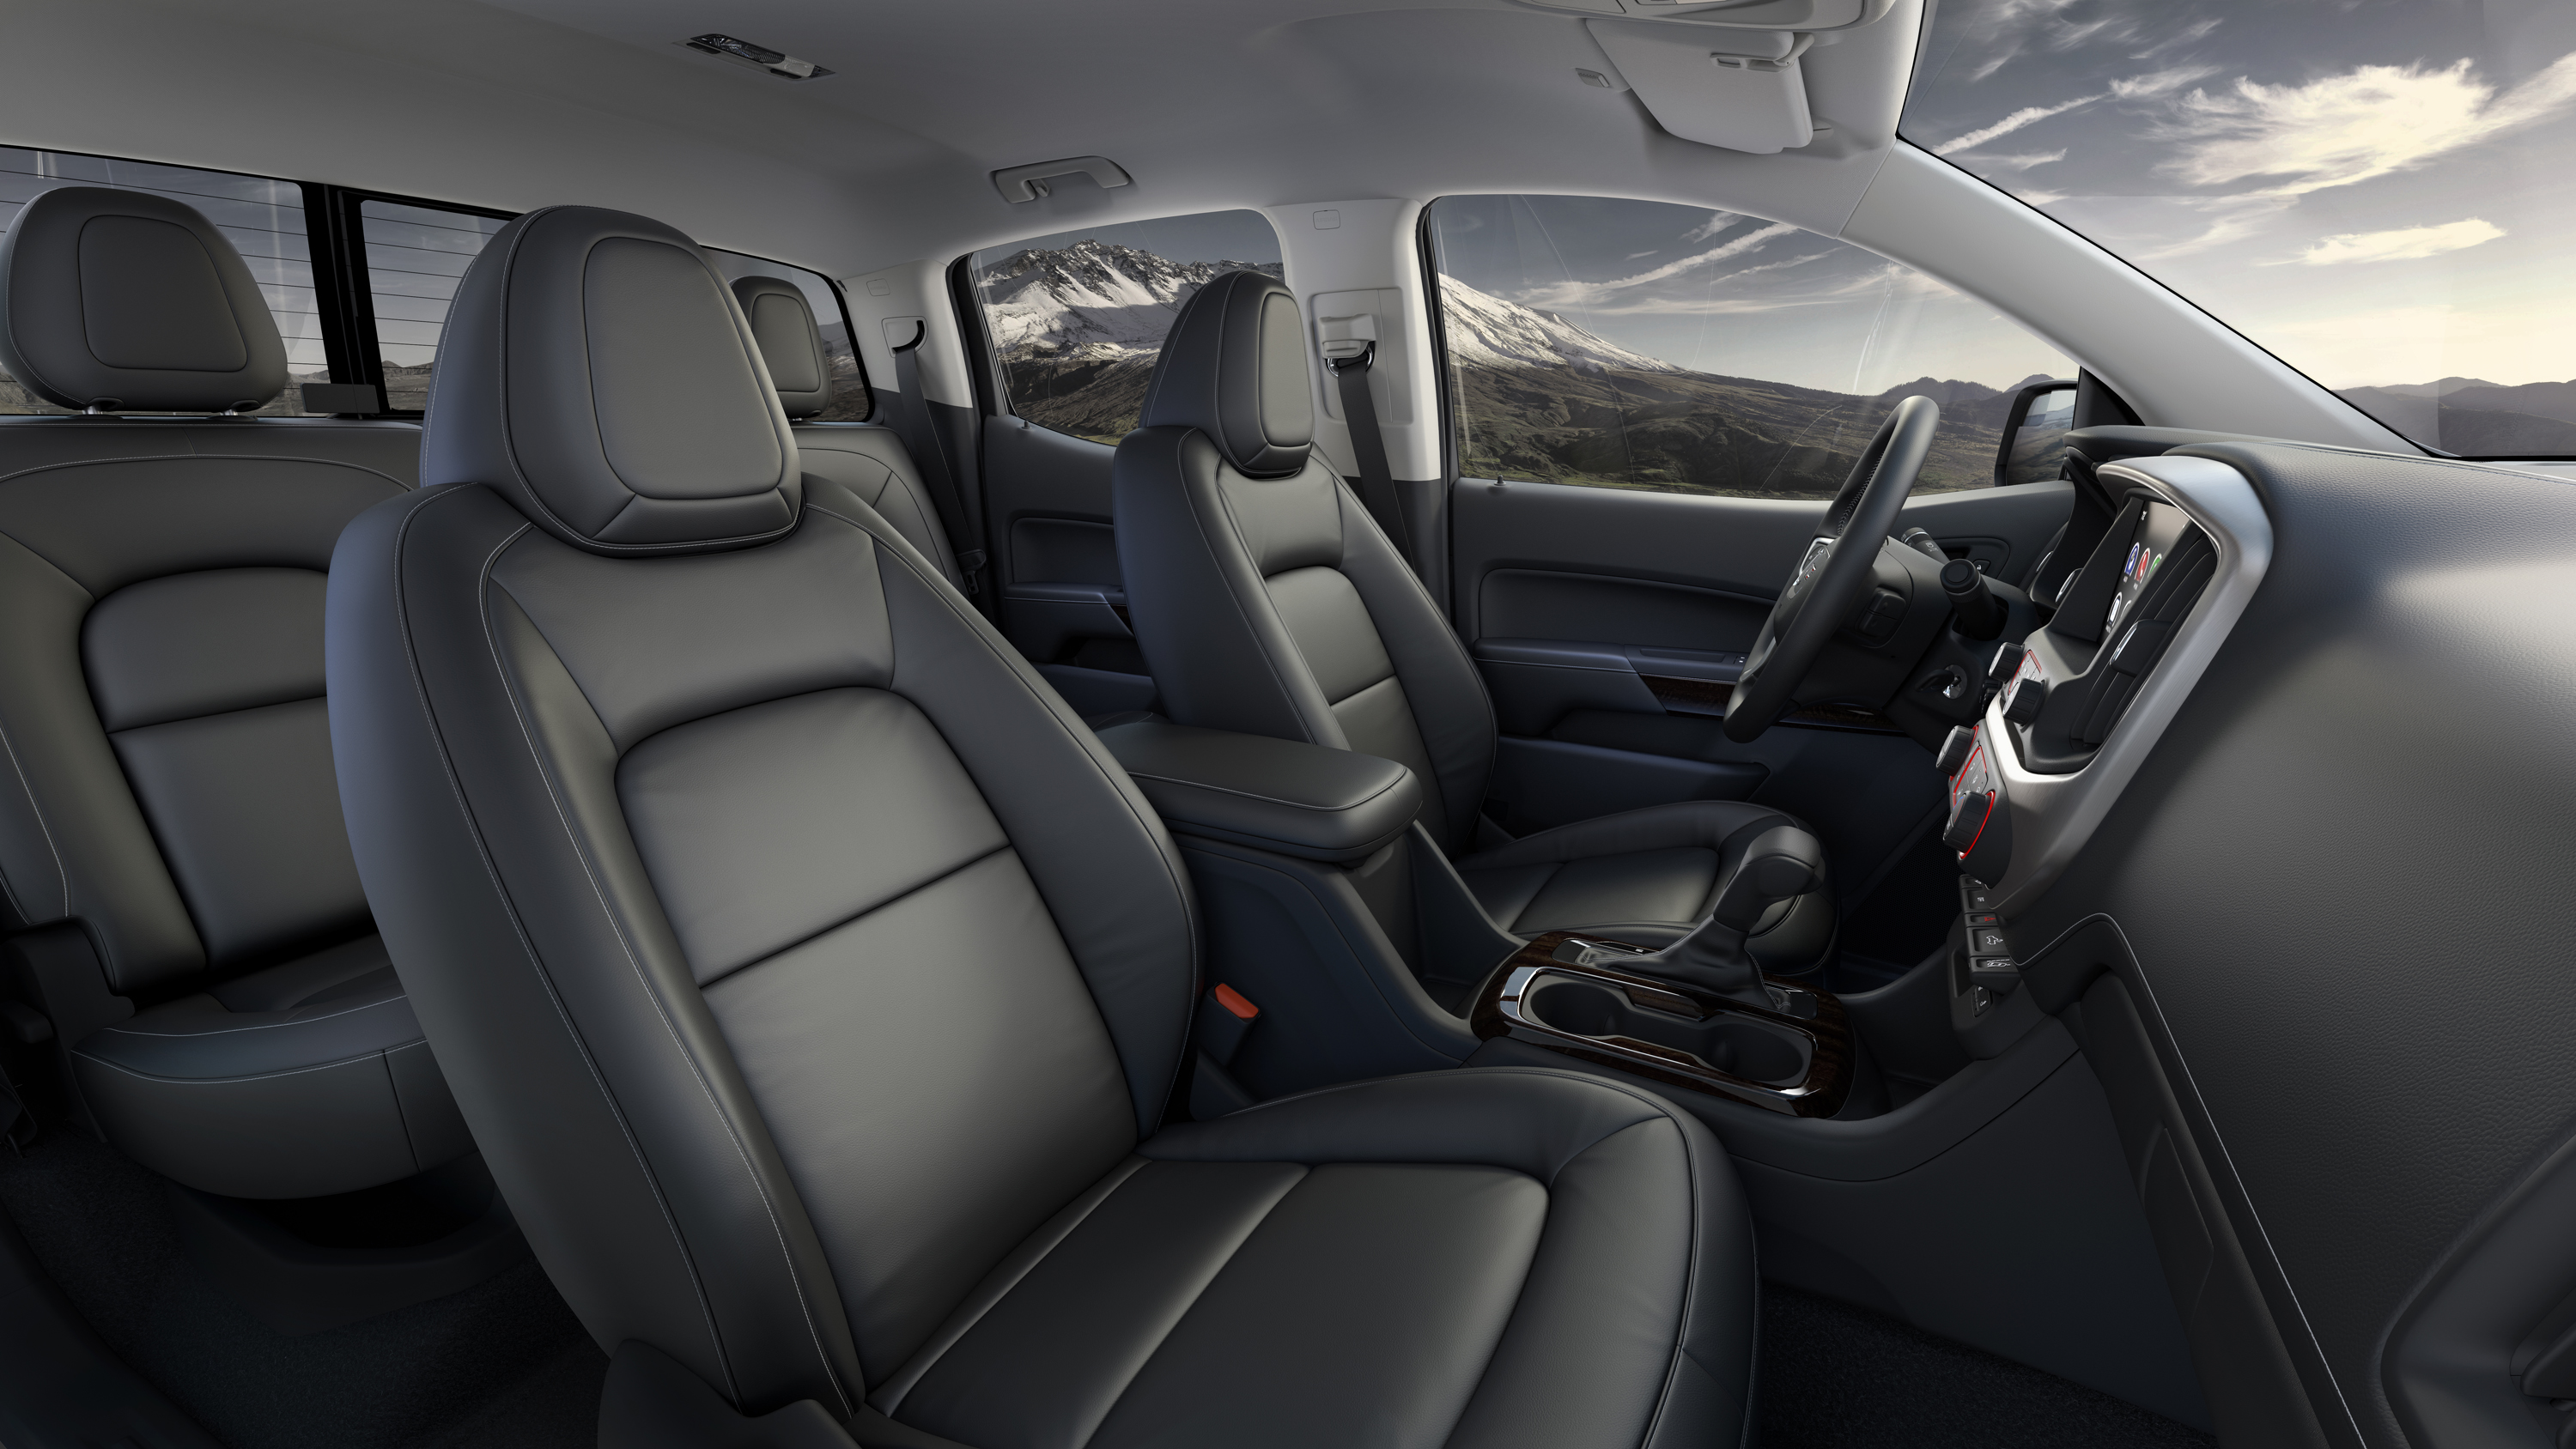 2015 Gmc Canyon Interior Profile From Passenger Side Motor